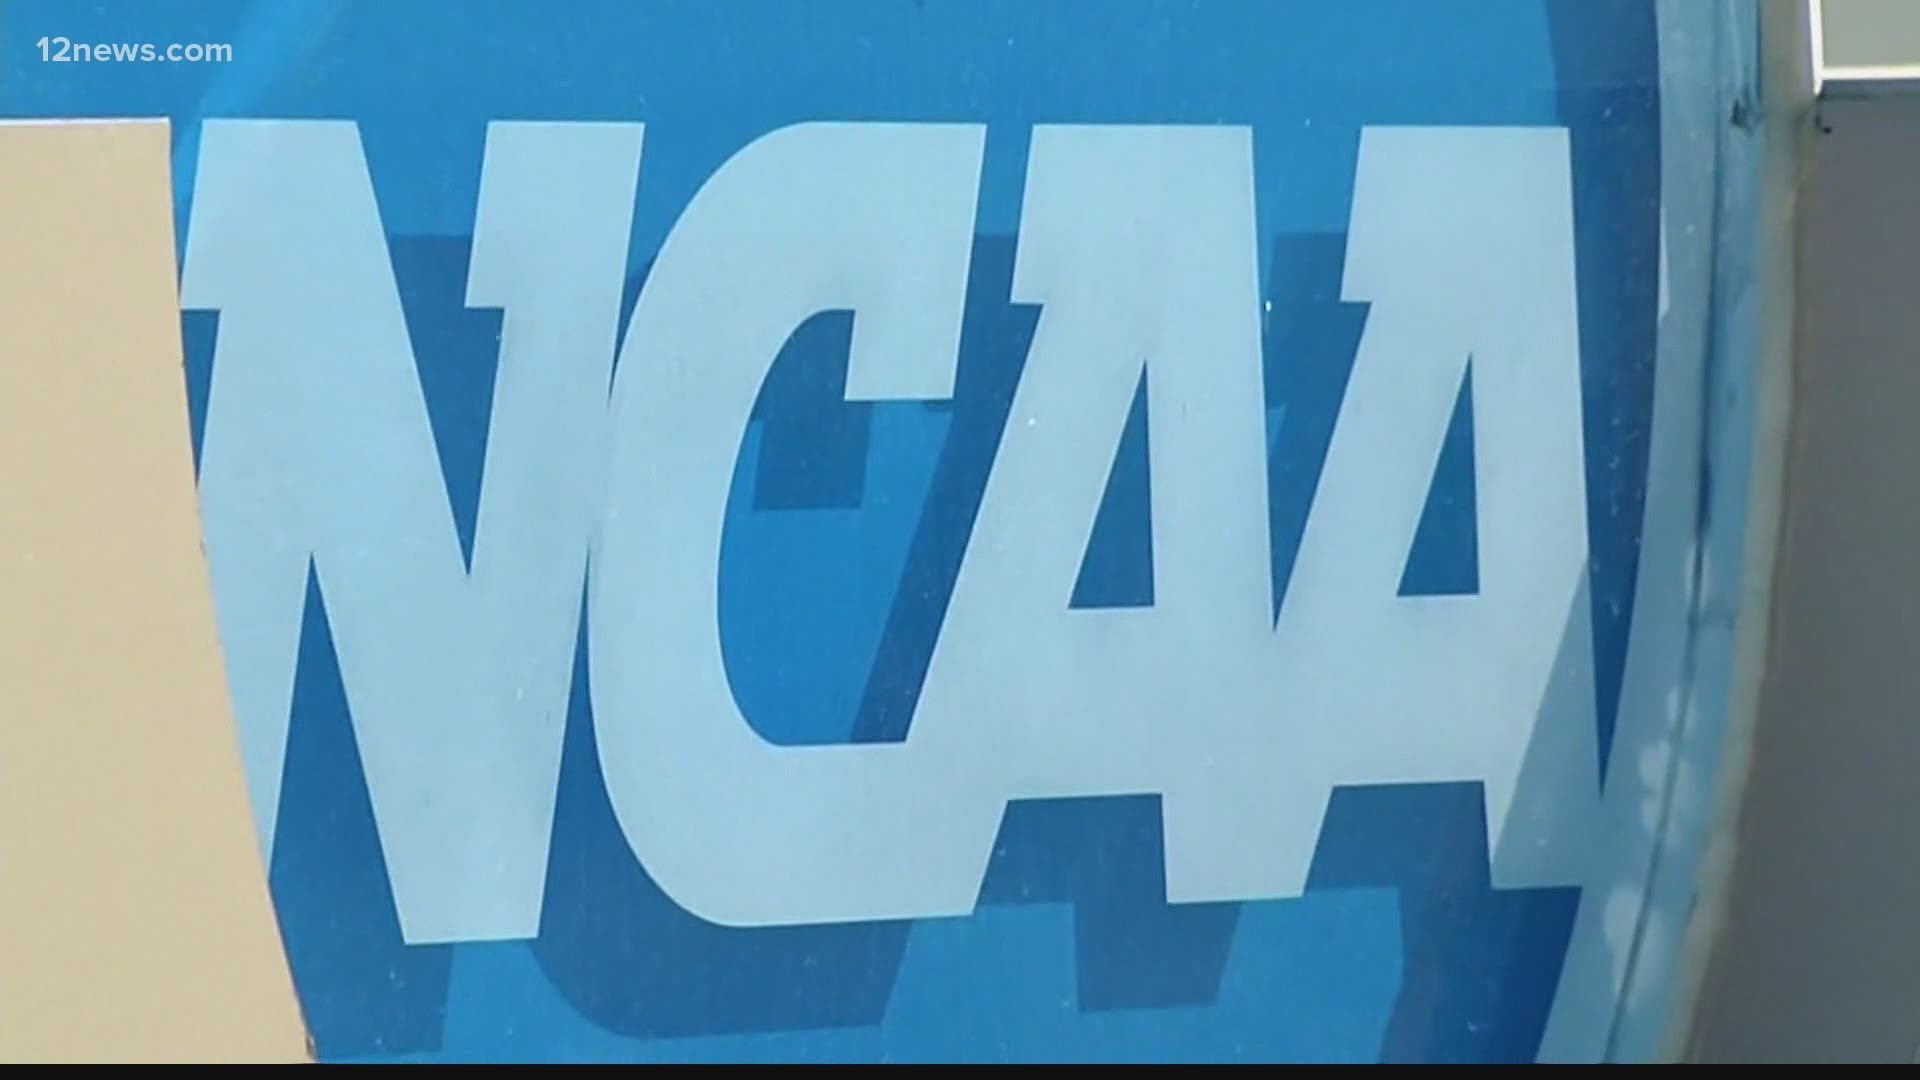 NCAA athletes will be eligible to make money on their name, image and likeness (NIL) after the NCAA announced it had adopted new, unified, interim NIL rules.